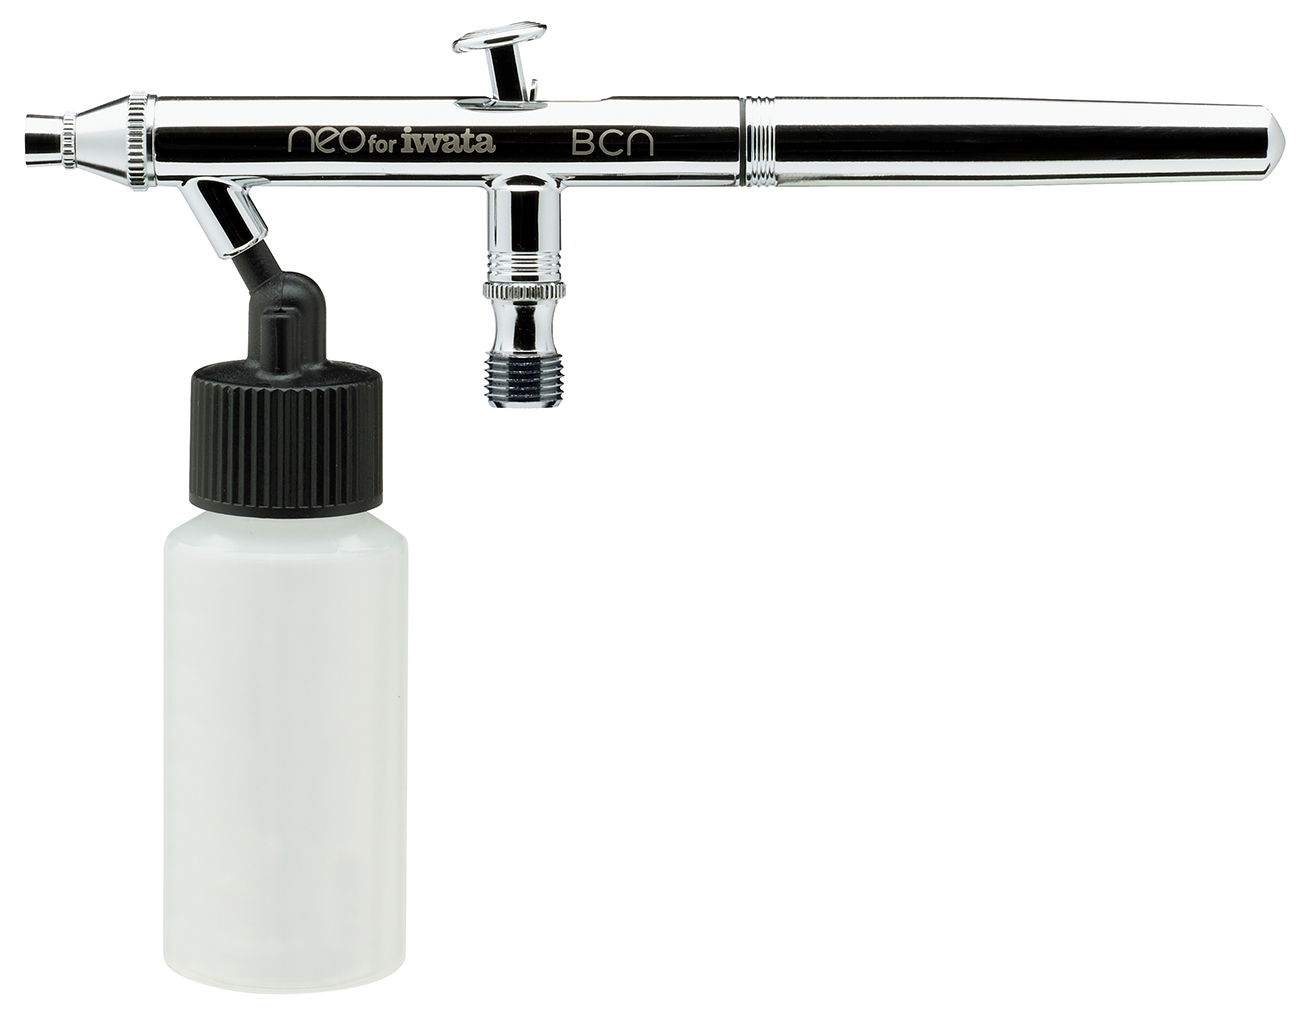 NEO for Iwata BCN Siphon Feed Dual Action Airbrush: Anest Iwata